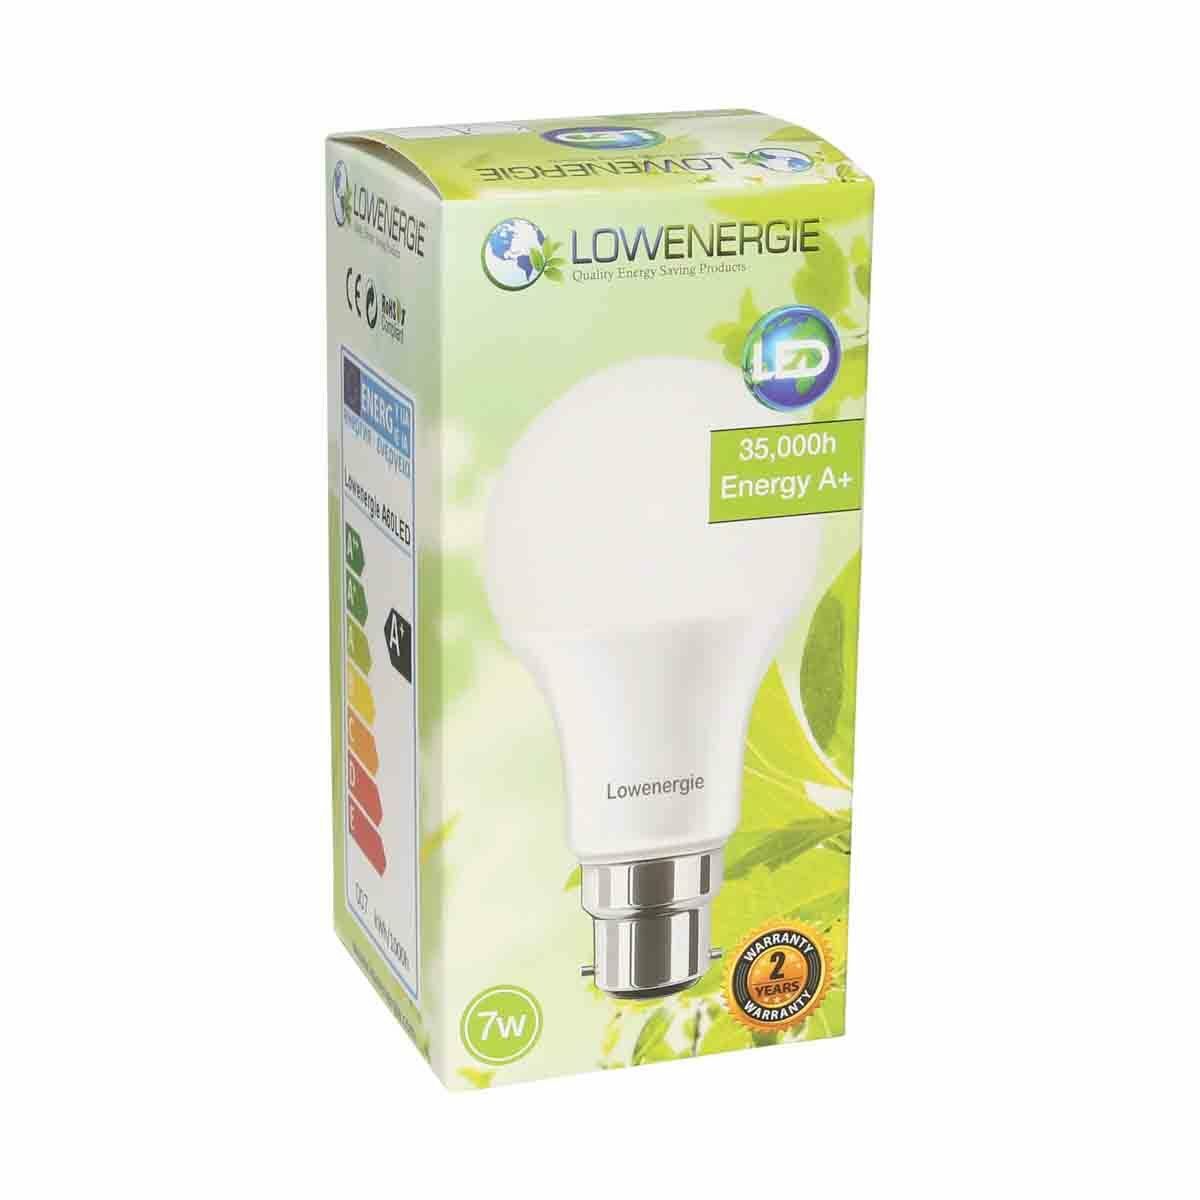 Basics LED E27 Edison Screw Bulb, 10 W (equivalent to 75W), Warm  White, Non Dimmable - 2 Count (Pack of 1)